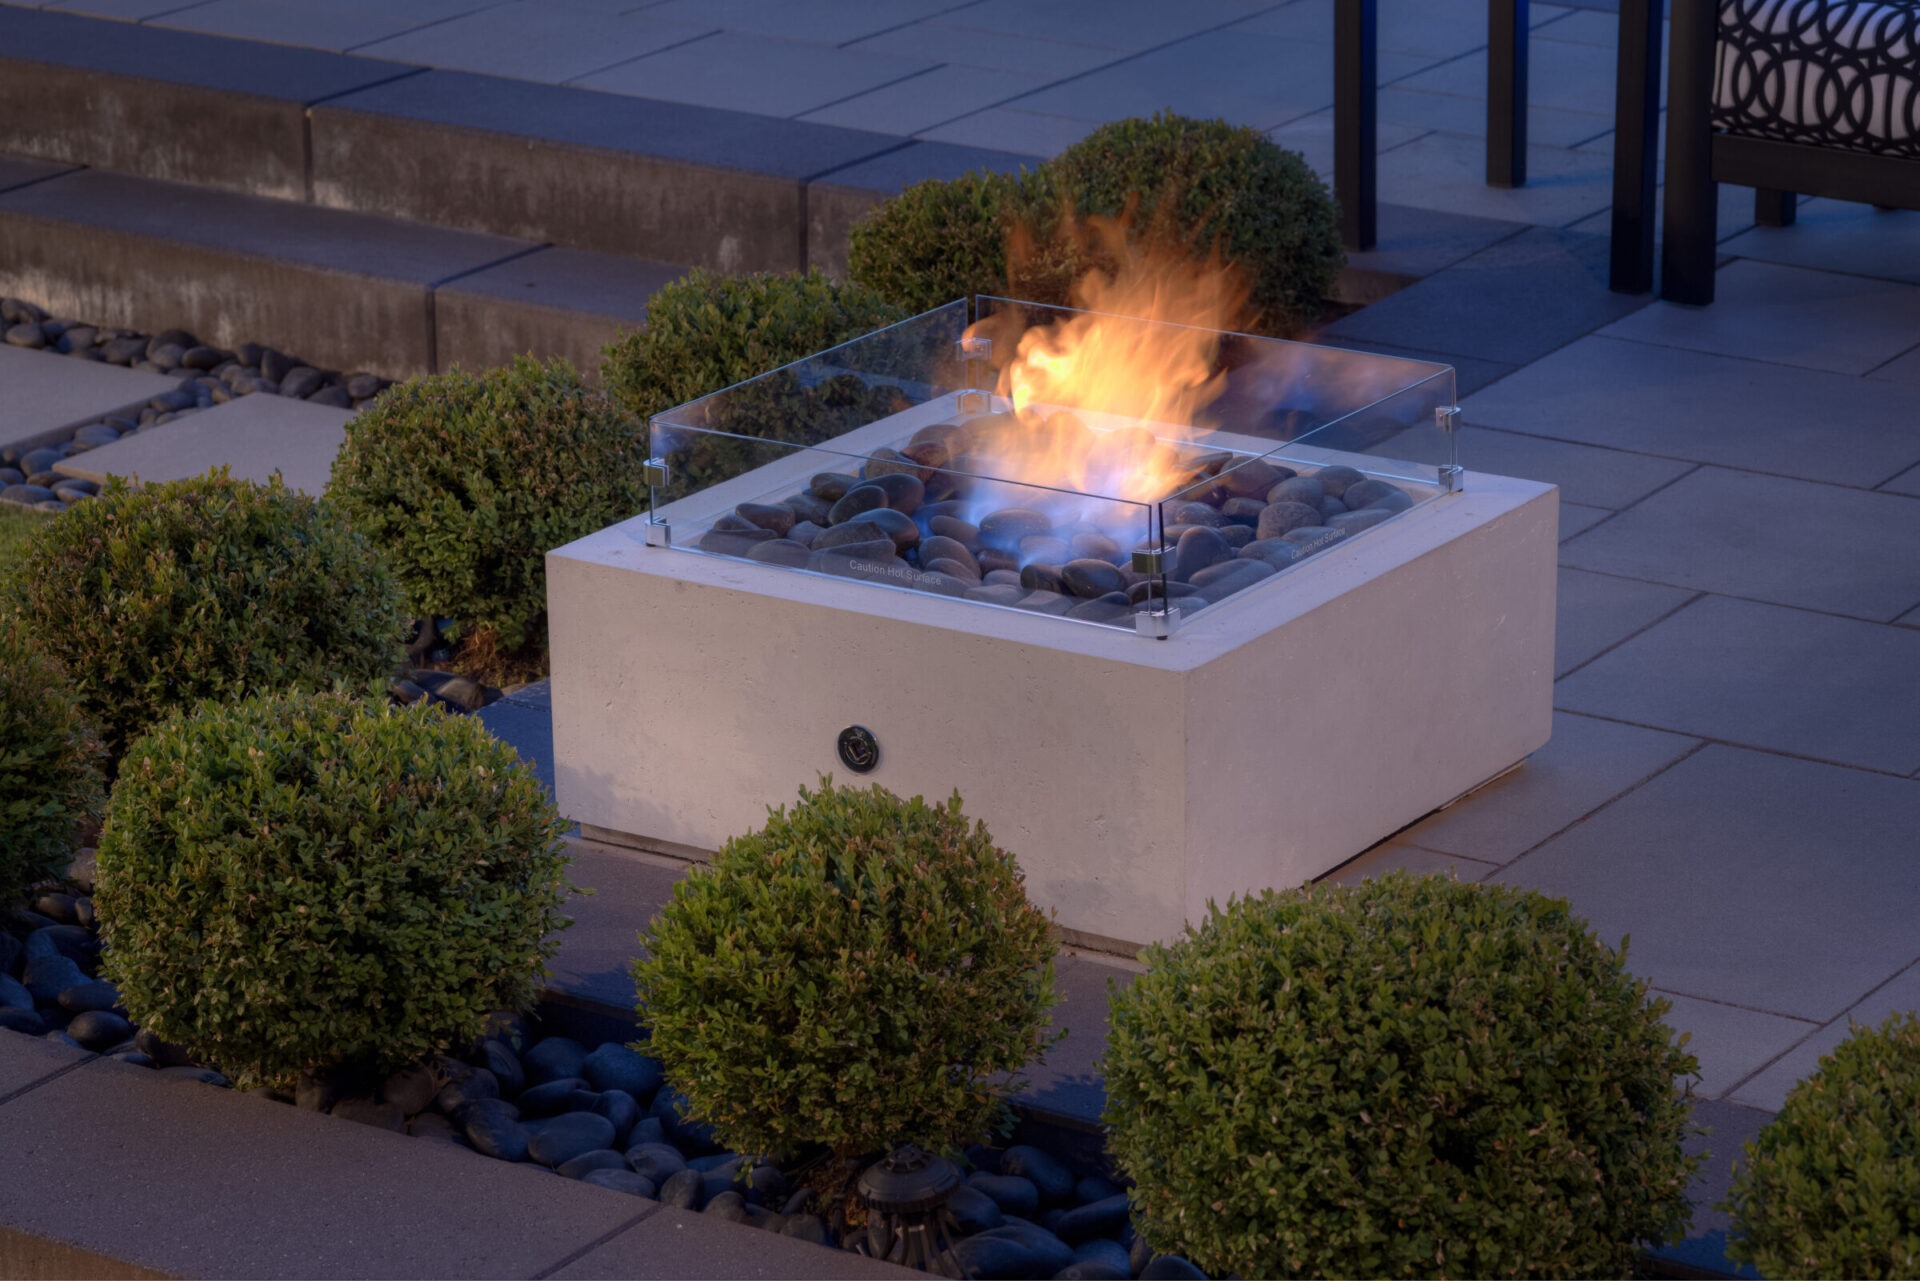 An outdoor patio with a modern square fire pit, featuring clear glass wind guards, surrounded by dark pebbles, green shrubs, and paving stones.